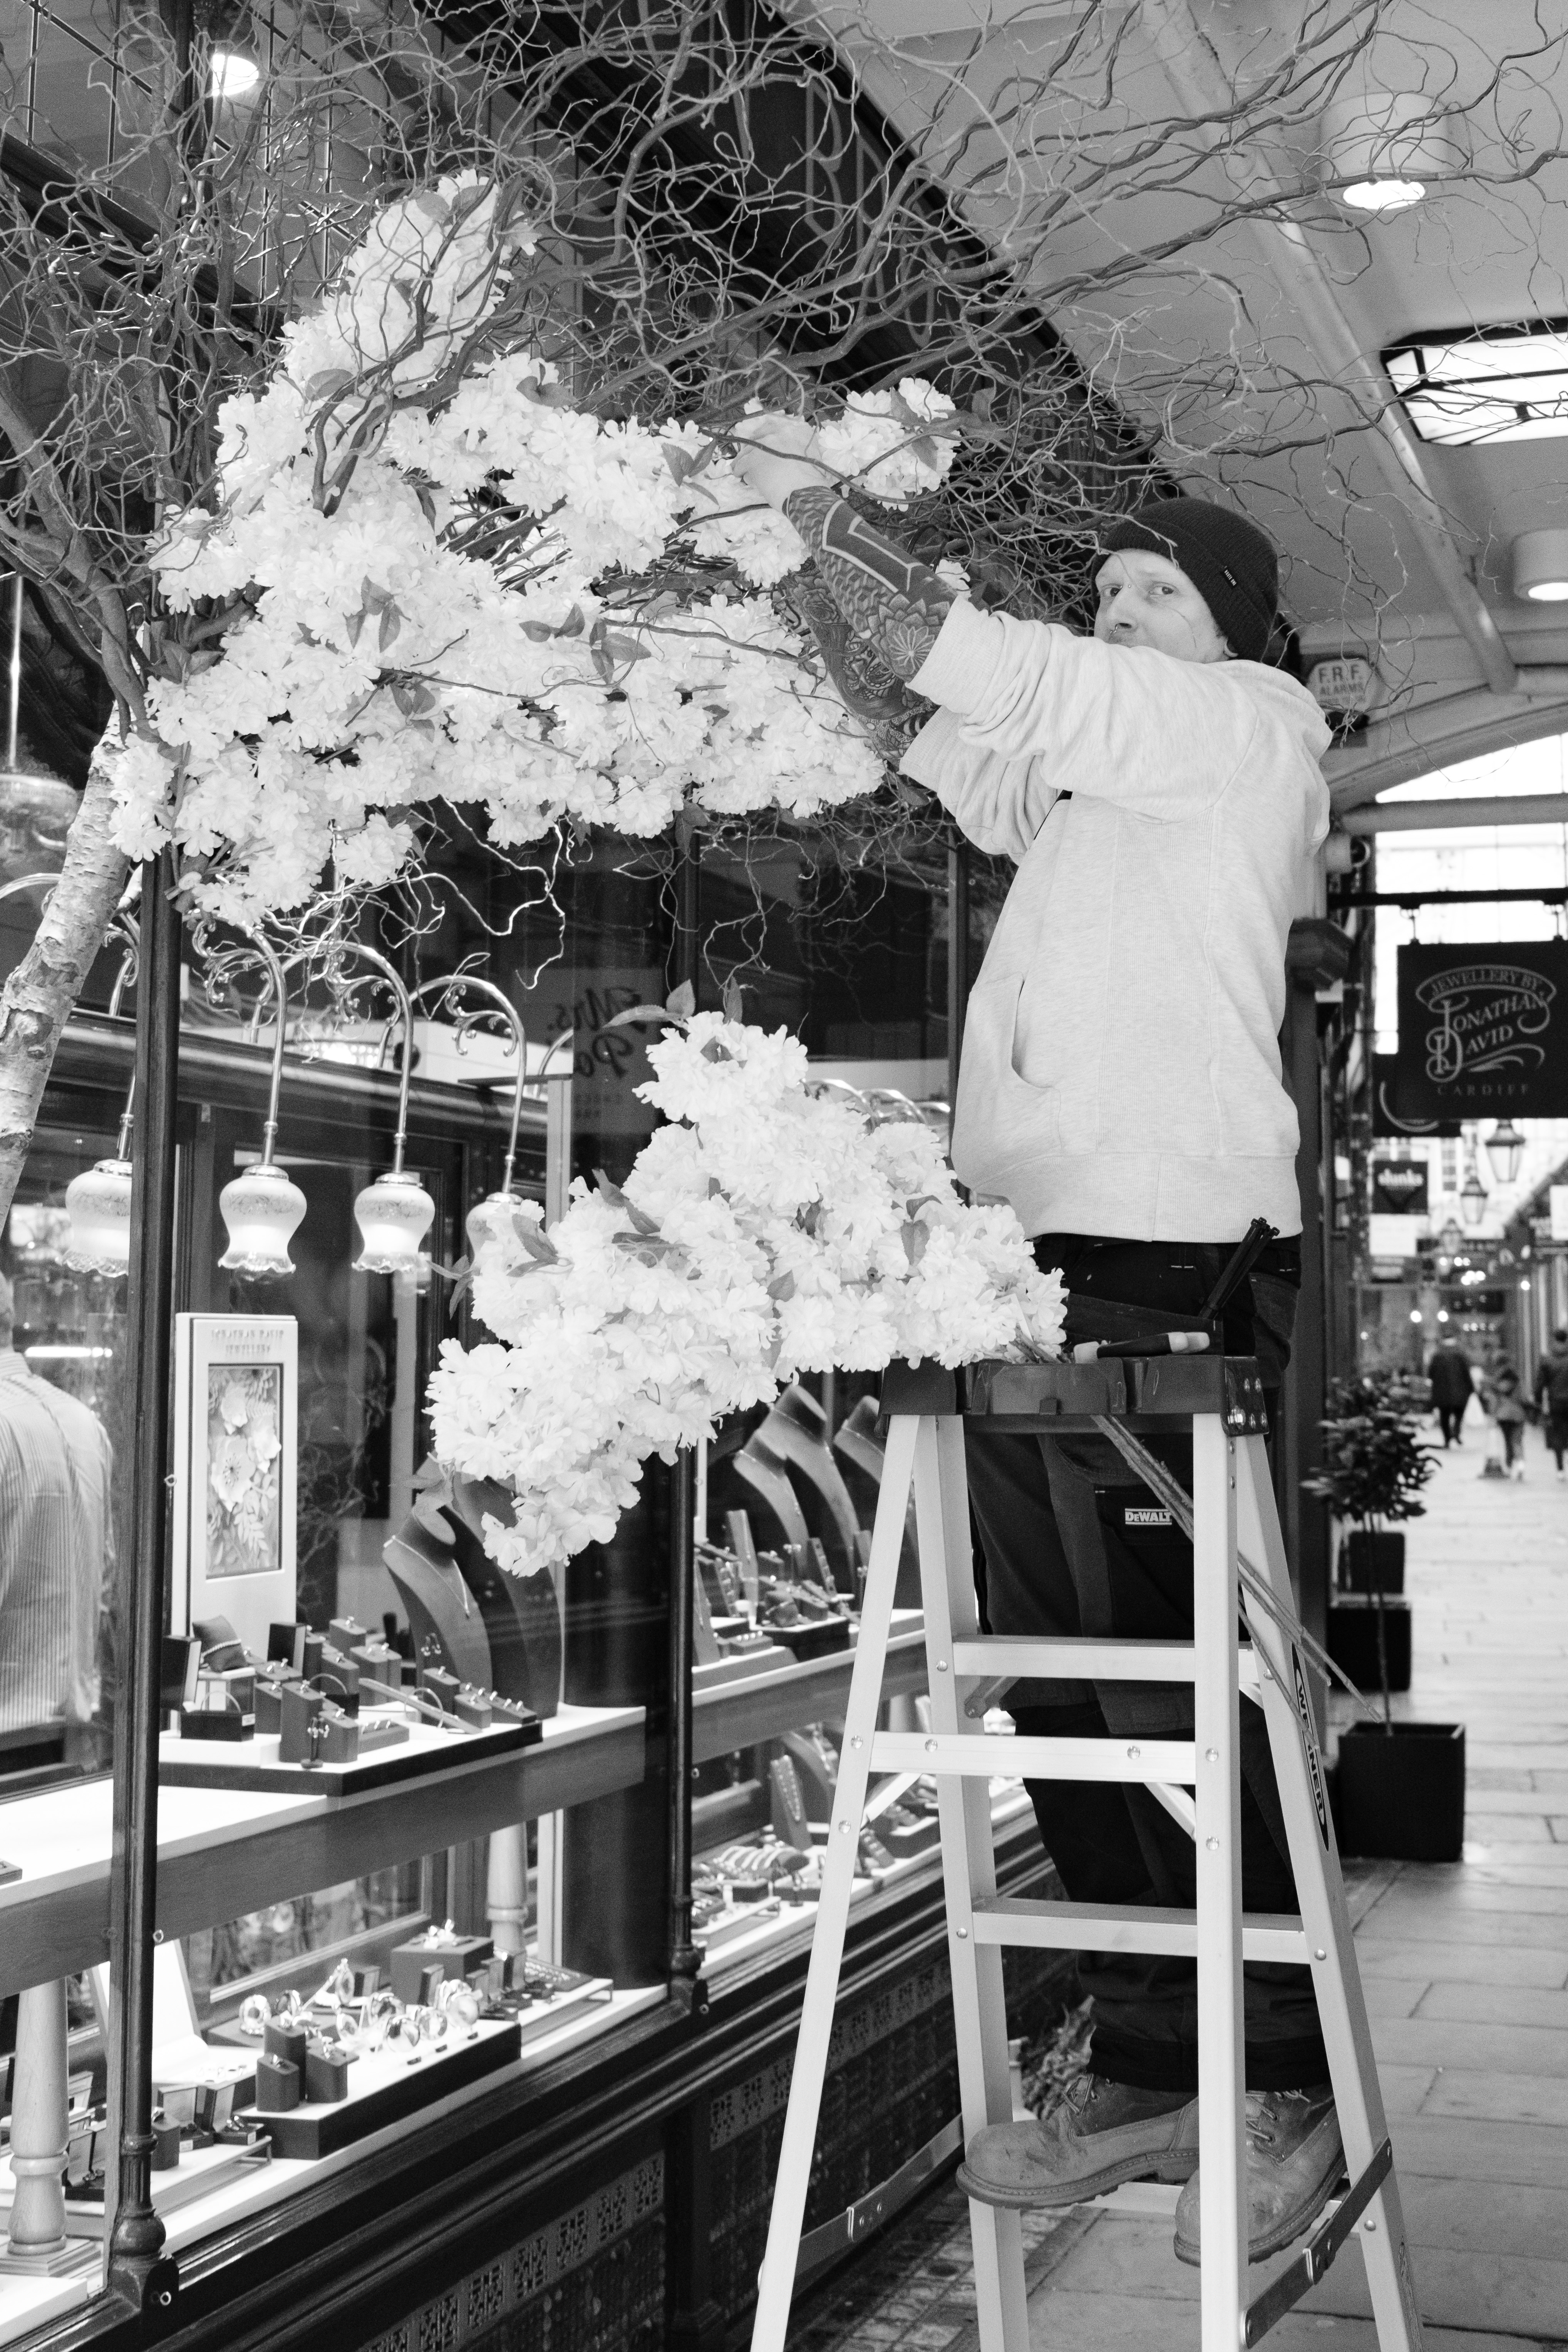 A photo of a person standing on a step ladder installing a tree onto the facade of a shop window, in black and white.